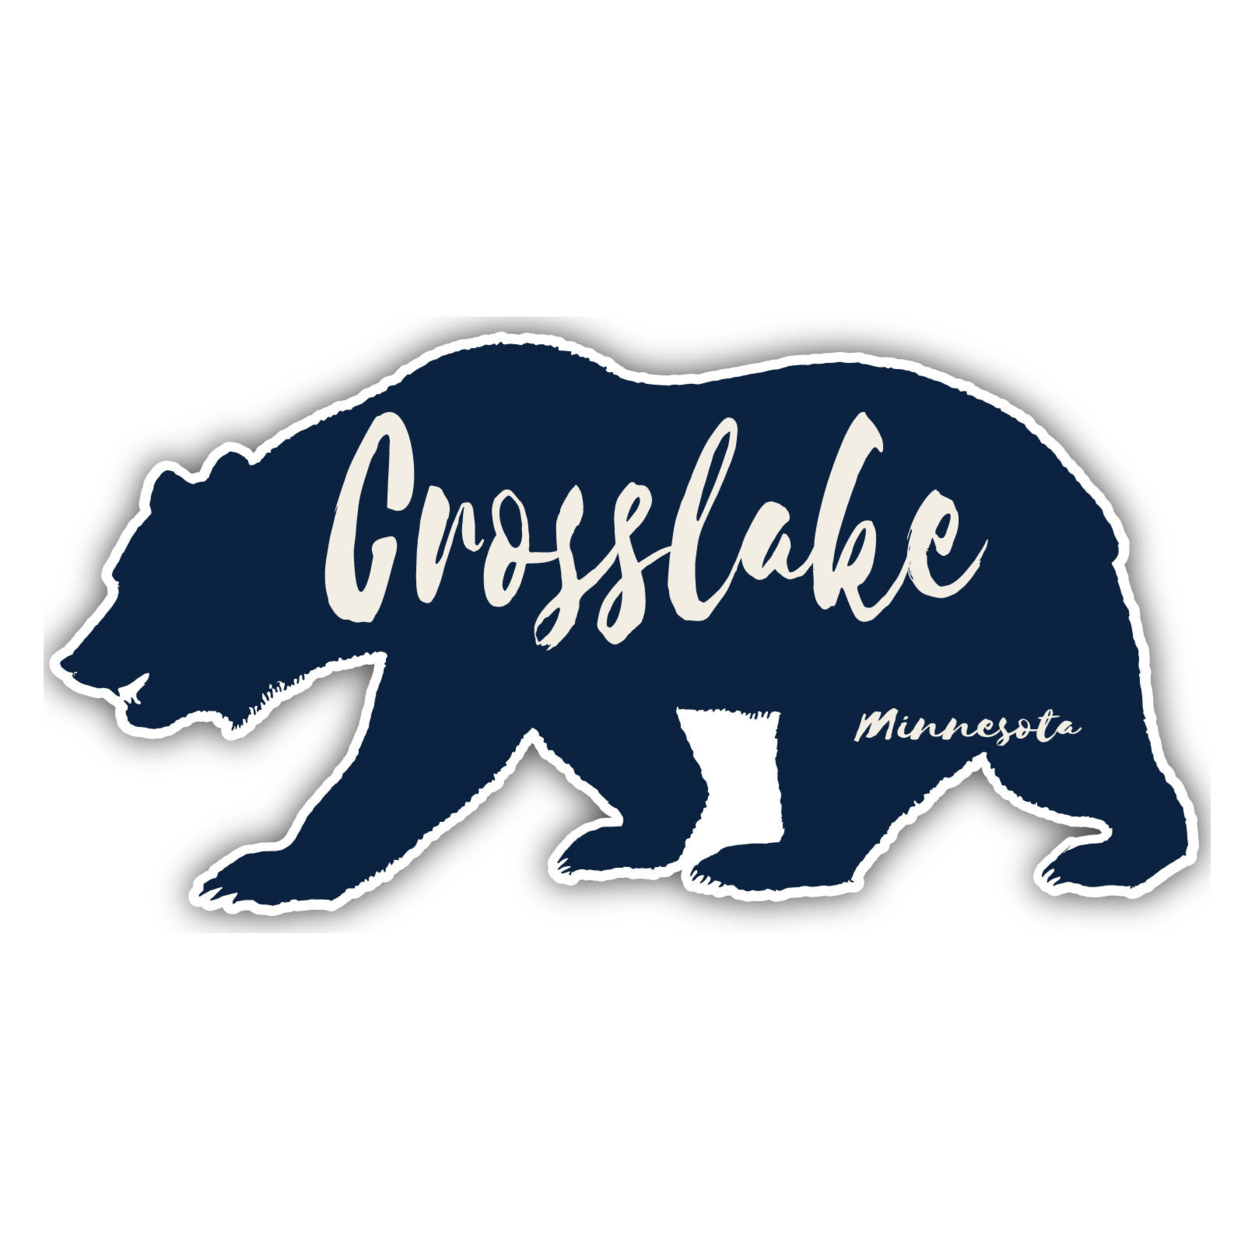 Crosslake Minnesota Souvenir Decorative Stickers (Choose Theme And Size) - 4-Pack, 8-Inch, Great Outdoors